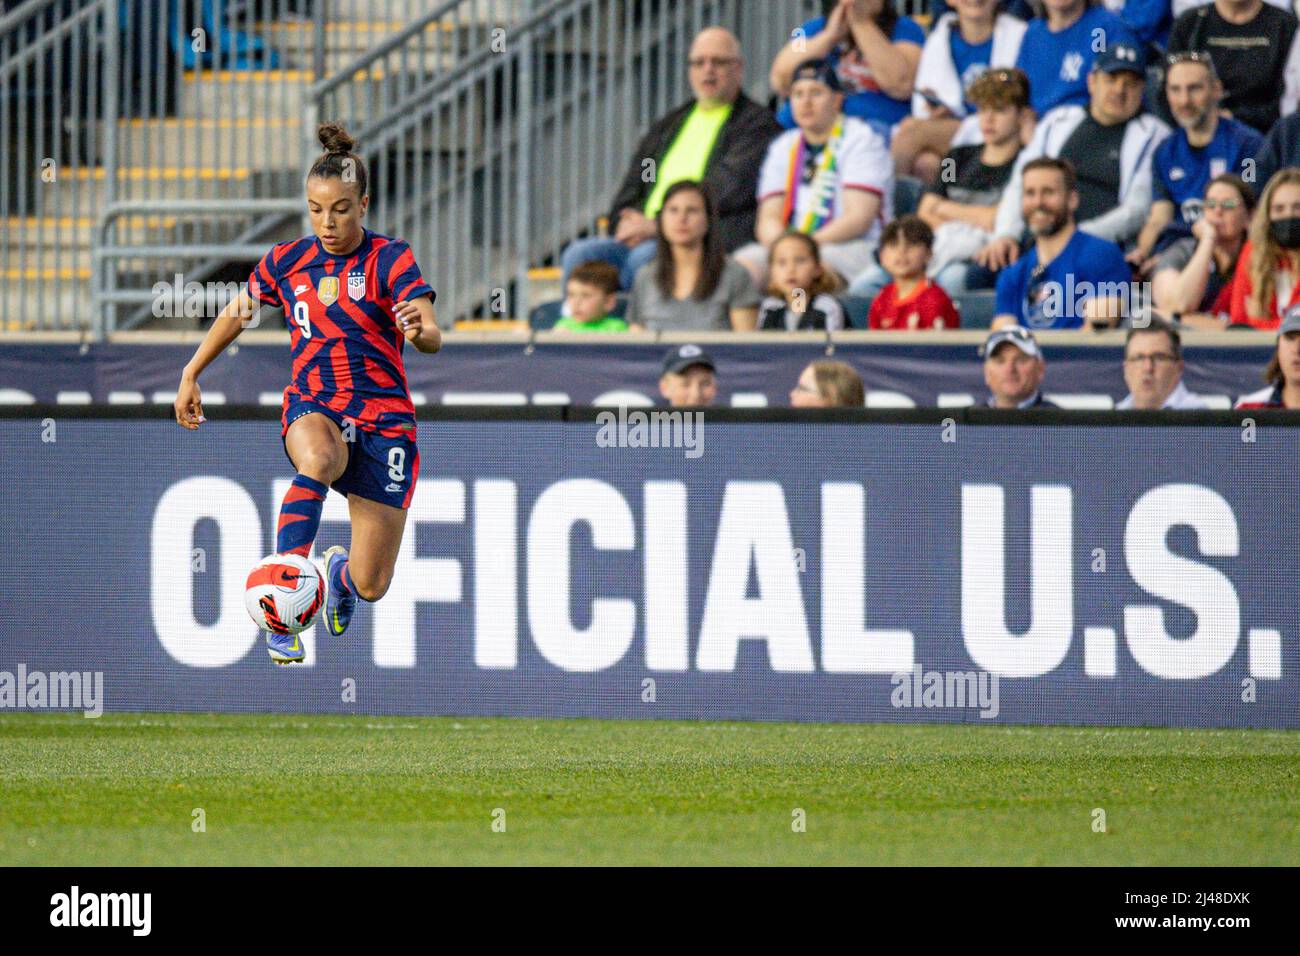 Mallory Swanson Pugh dribbling during a US women's national team soccer game. Professional woman footballer / women playing soccer Stock Photo